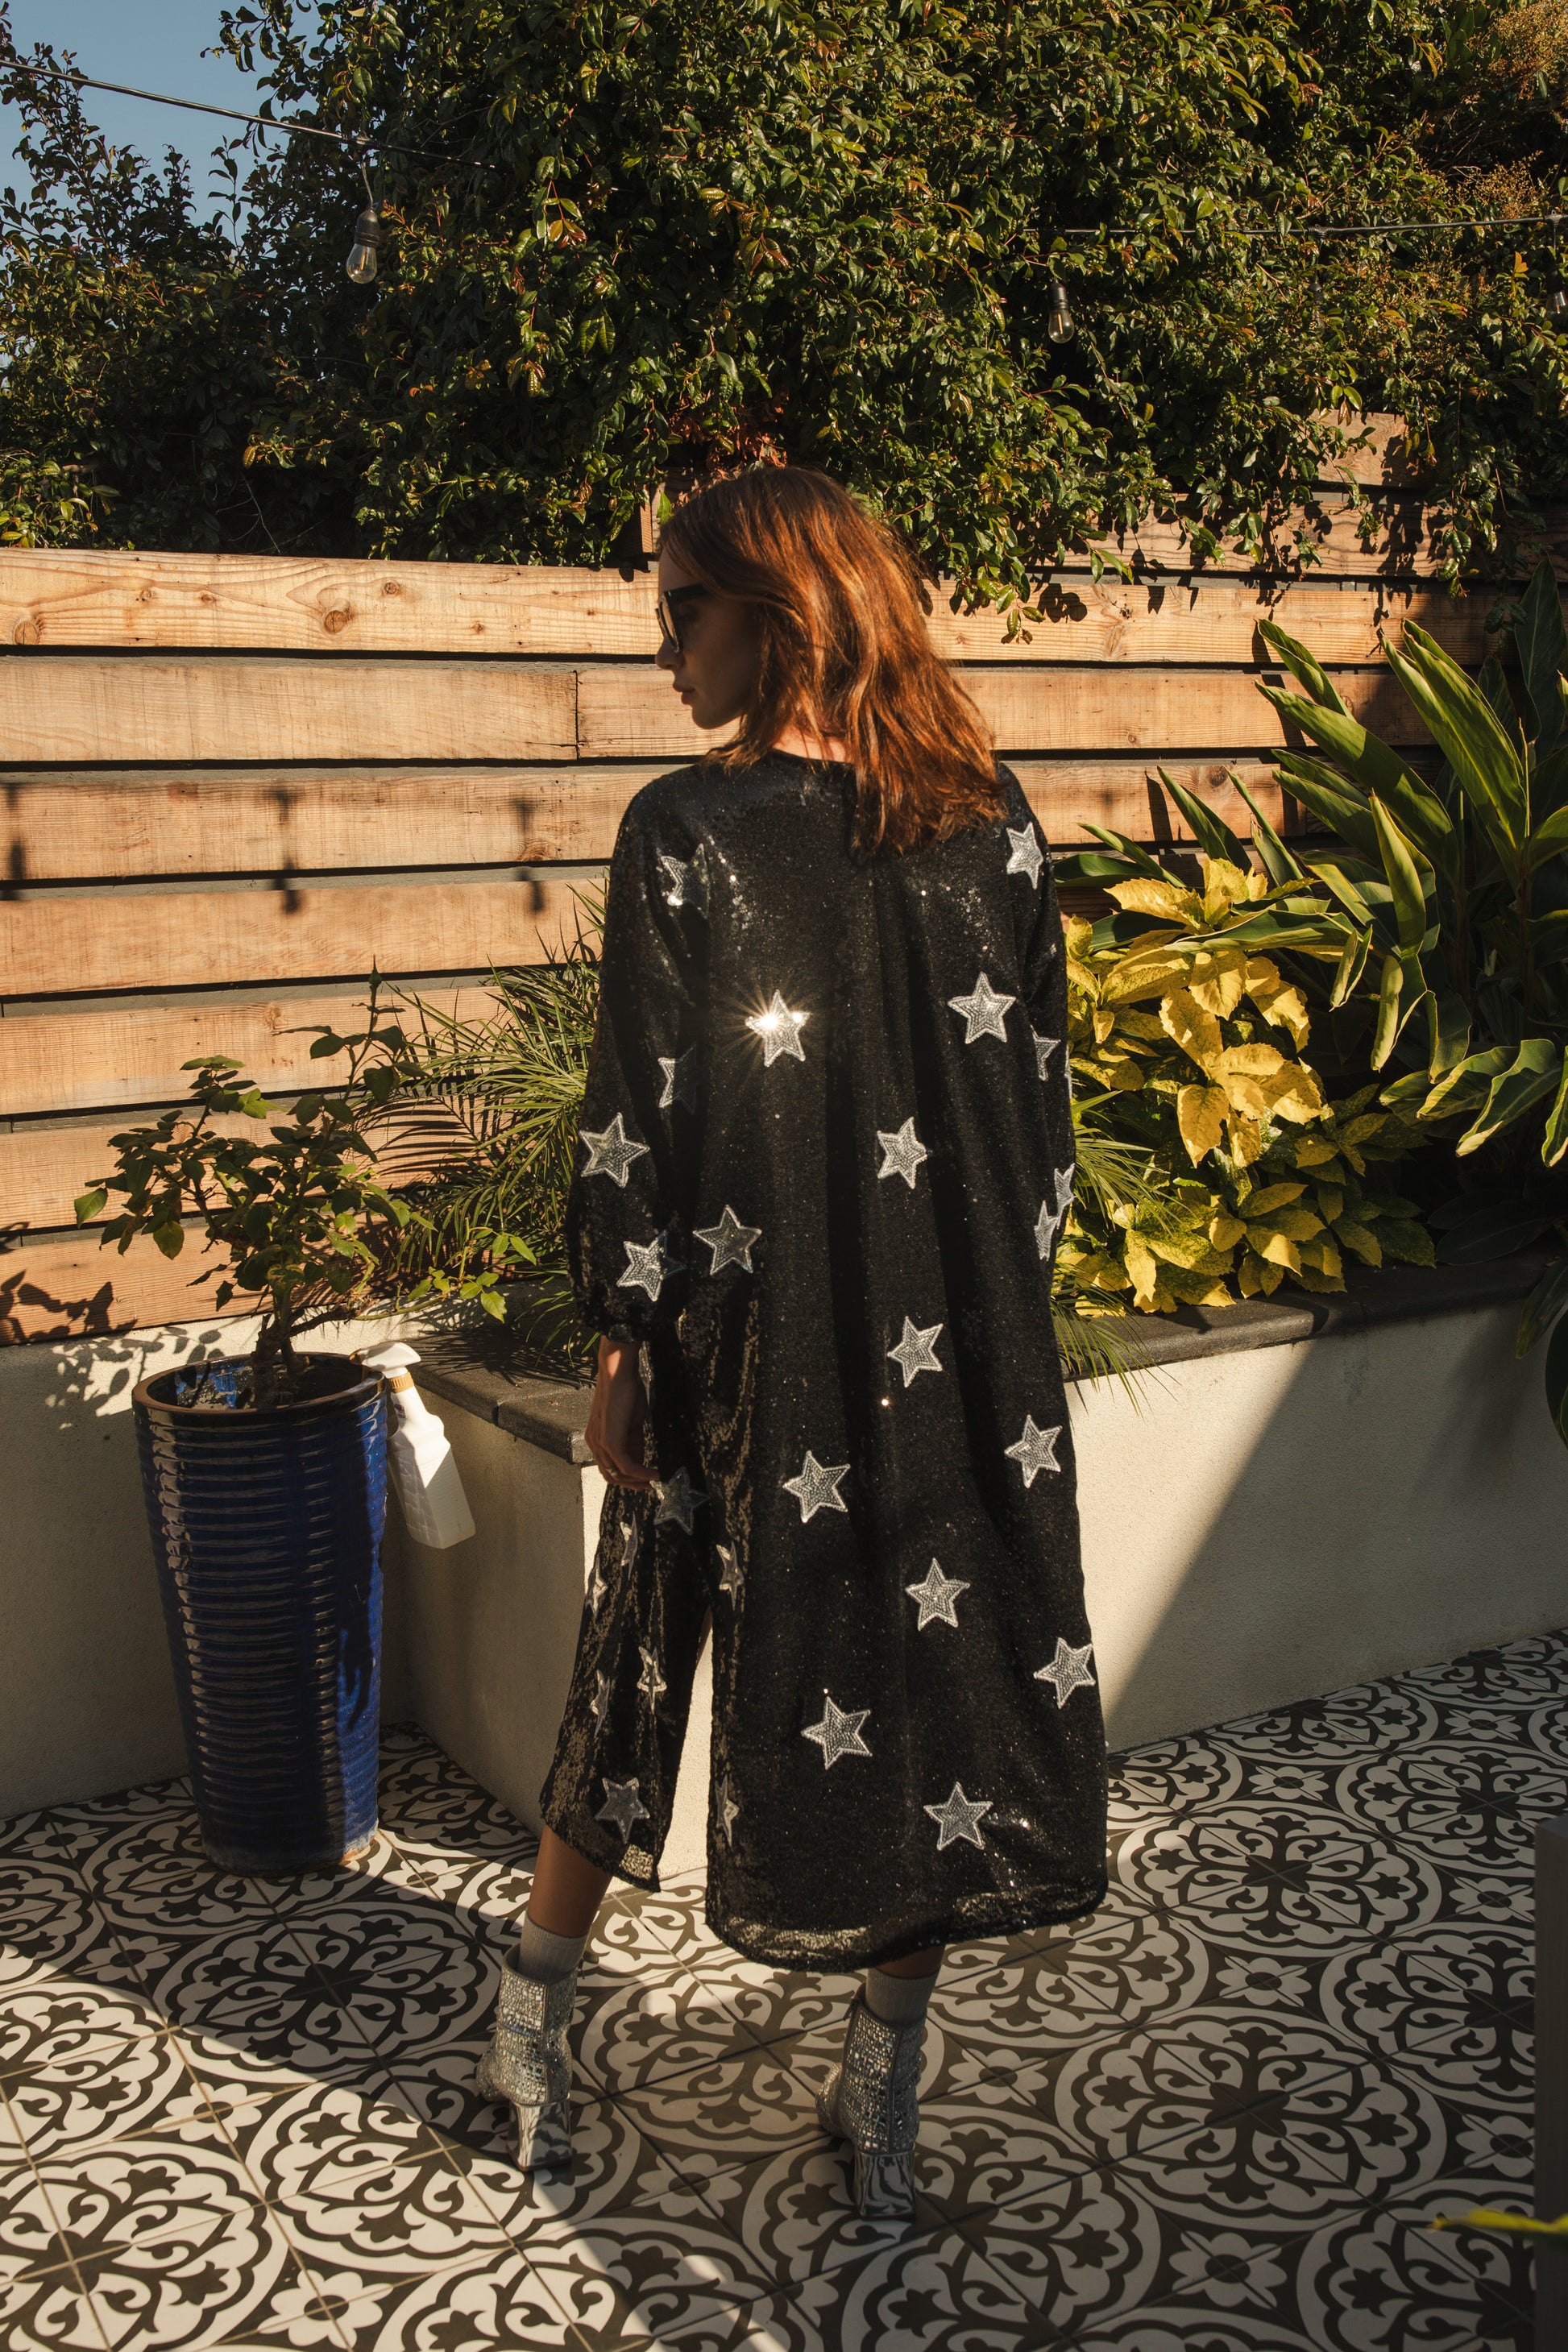 jennafer grace Elton Stars Noir Sequin Cocoon Jacket black sequins with silver sequined stars opera coat duster cardigan overcoat boho bohemian hippie romantic whimsical Studio 54 disco cocktail party festival unisex handmade in California USA